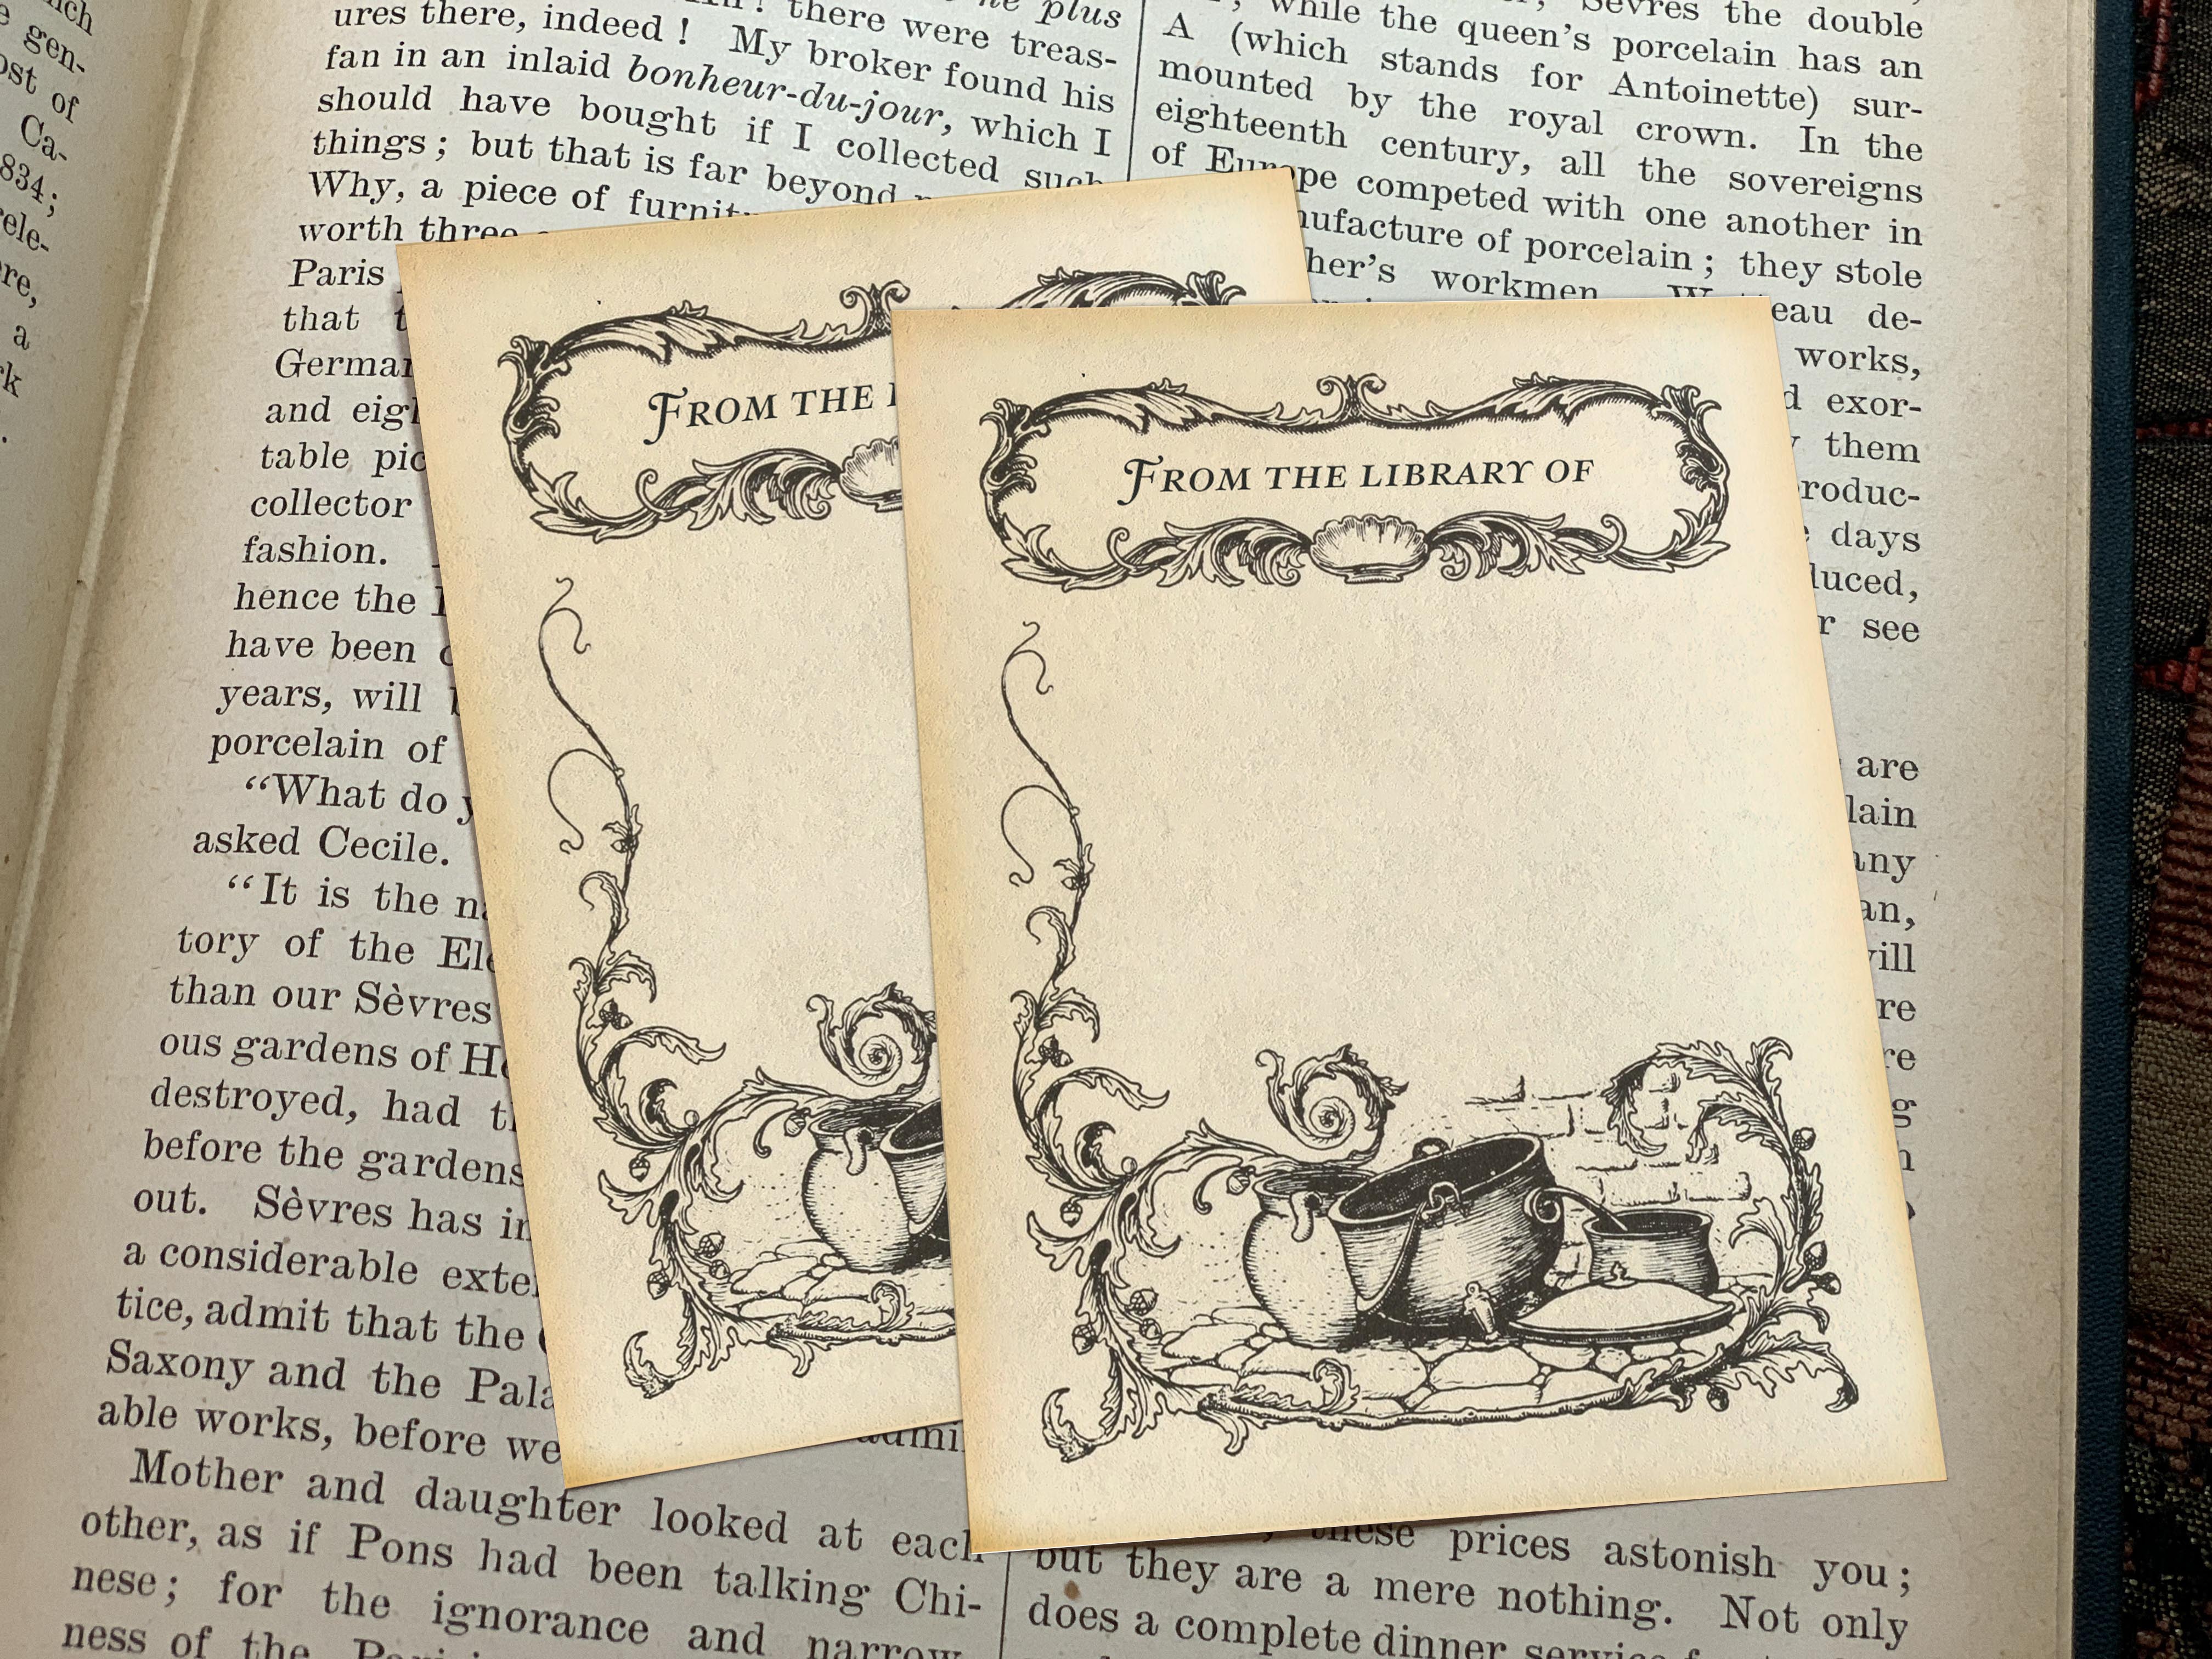 Cauldron, Personalized Witchy Ex-Libris Bookplates, Crafted on Traditional Gummed Paper, 3in x 4in, Set of 30